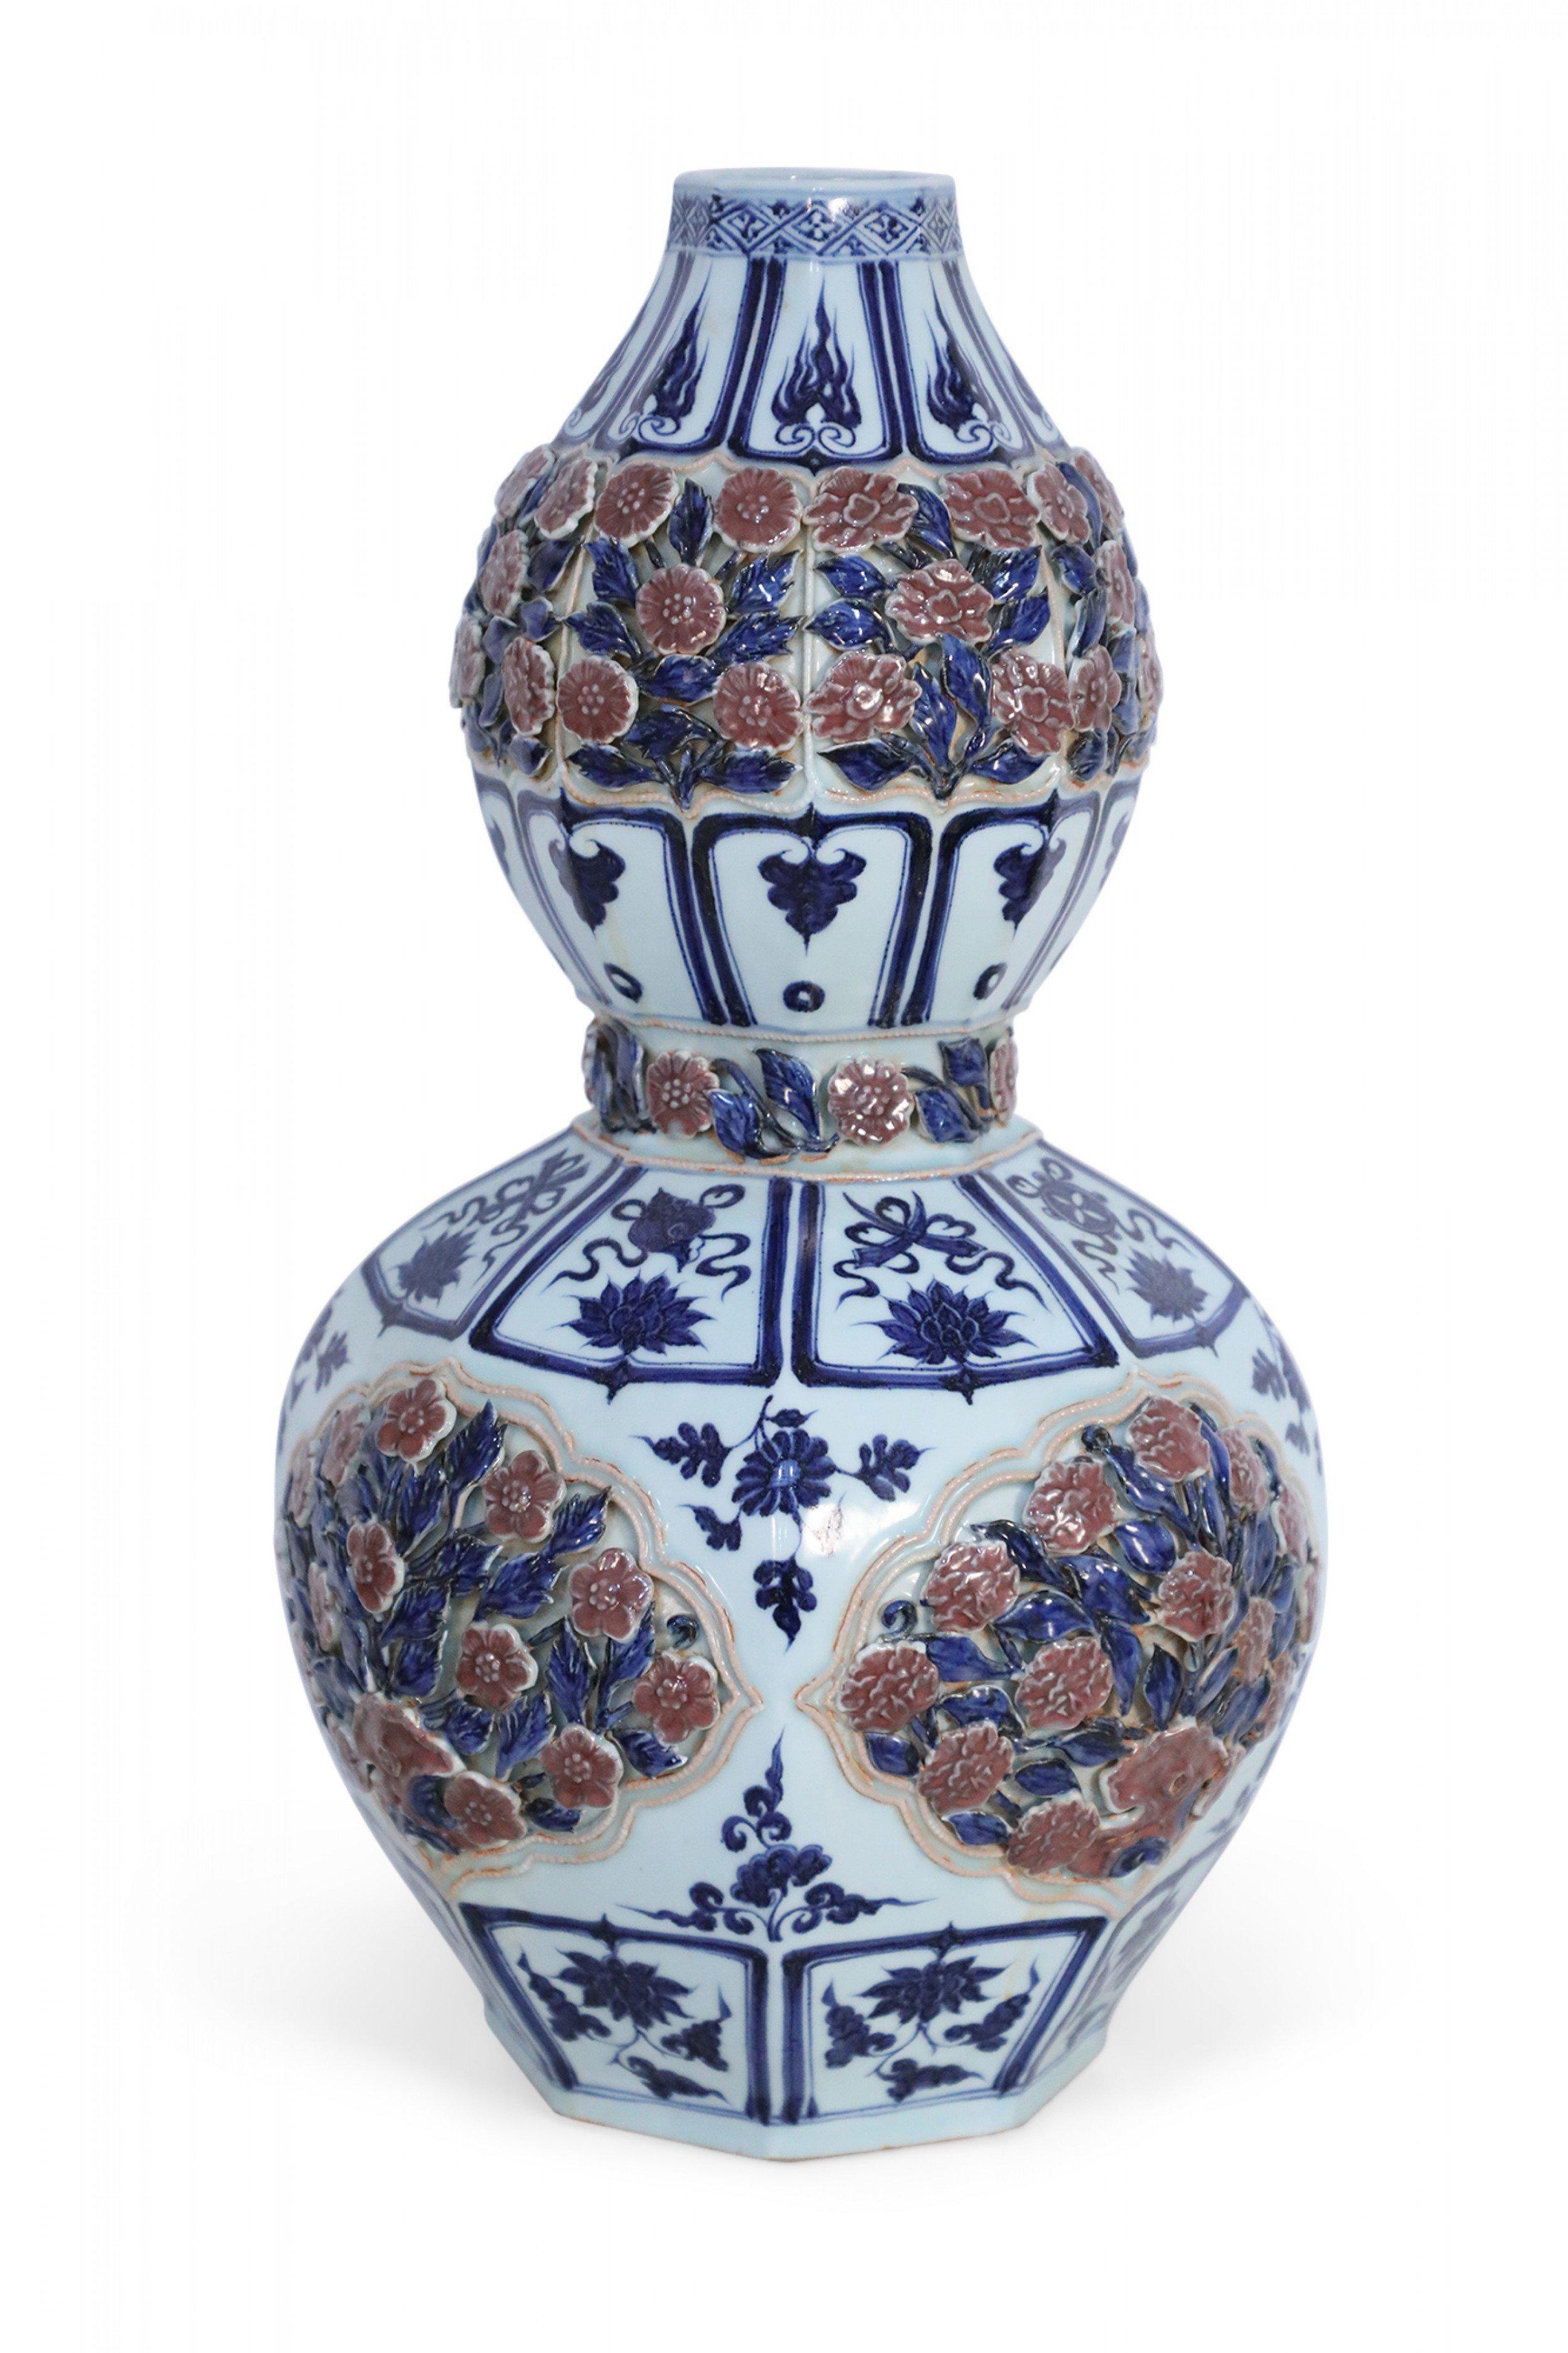 Chinese white and blue double-gourd porcelain vase decorated with bands of blue, framed iconography, and raised, pierced roses amid leaves wrapping the top and middle sections, and as the central motif around the bulbous bottom half.